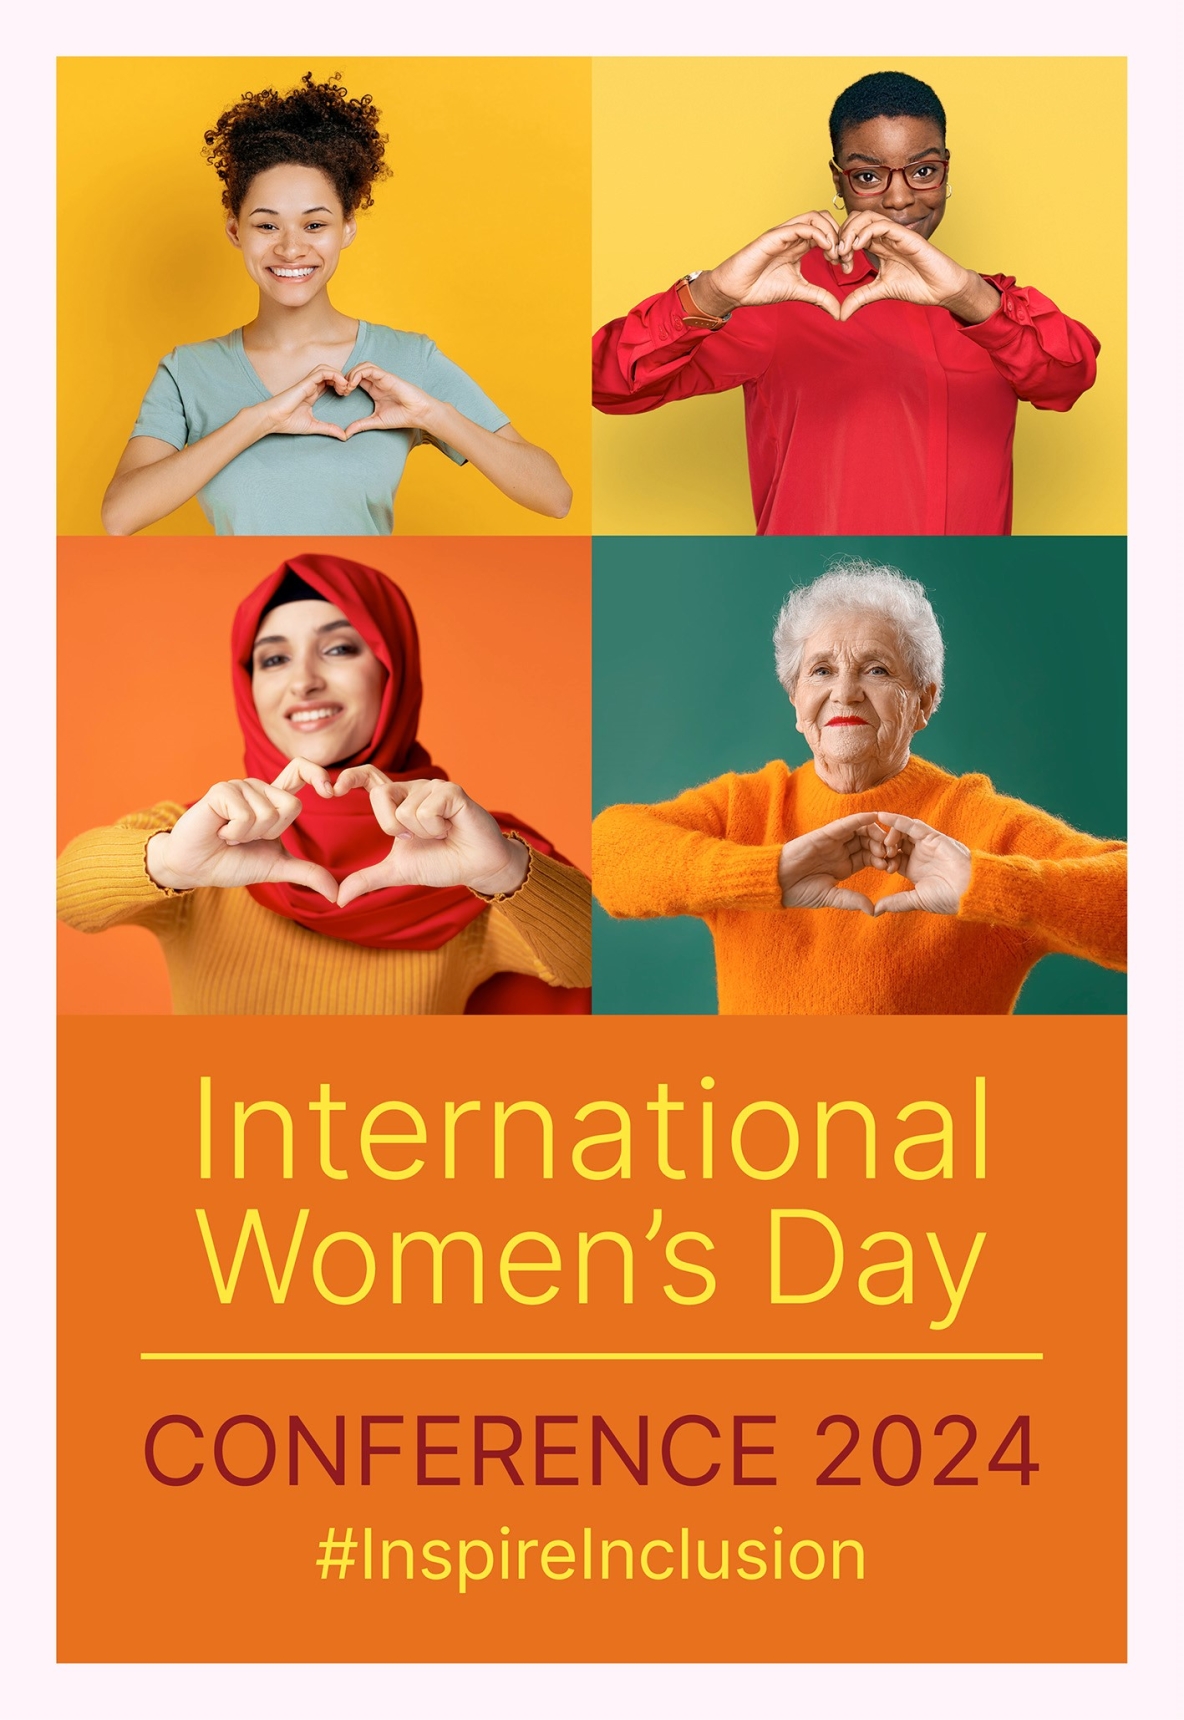 International Women's Day Conference 2024